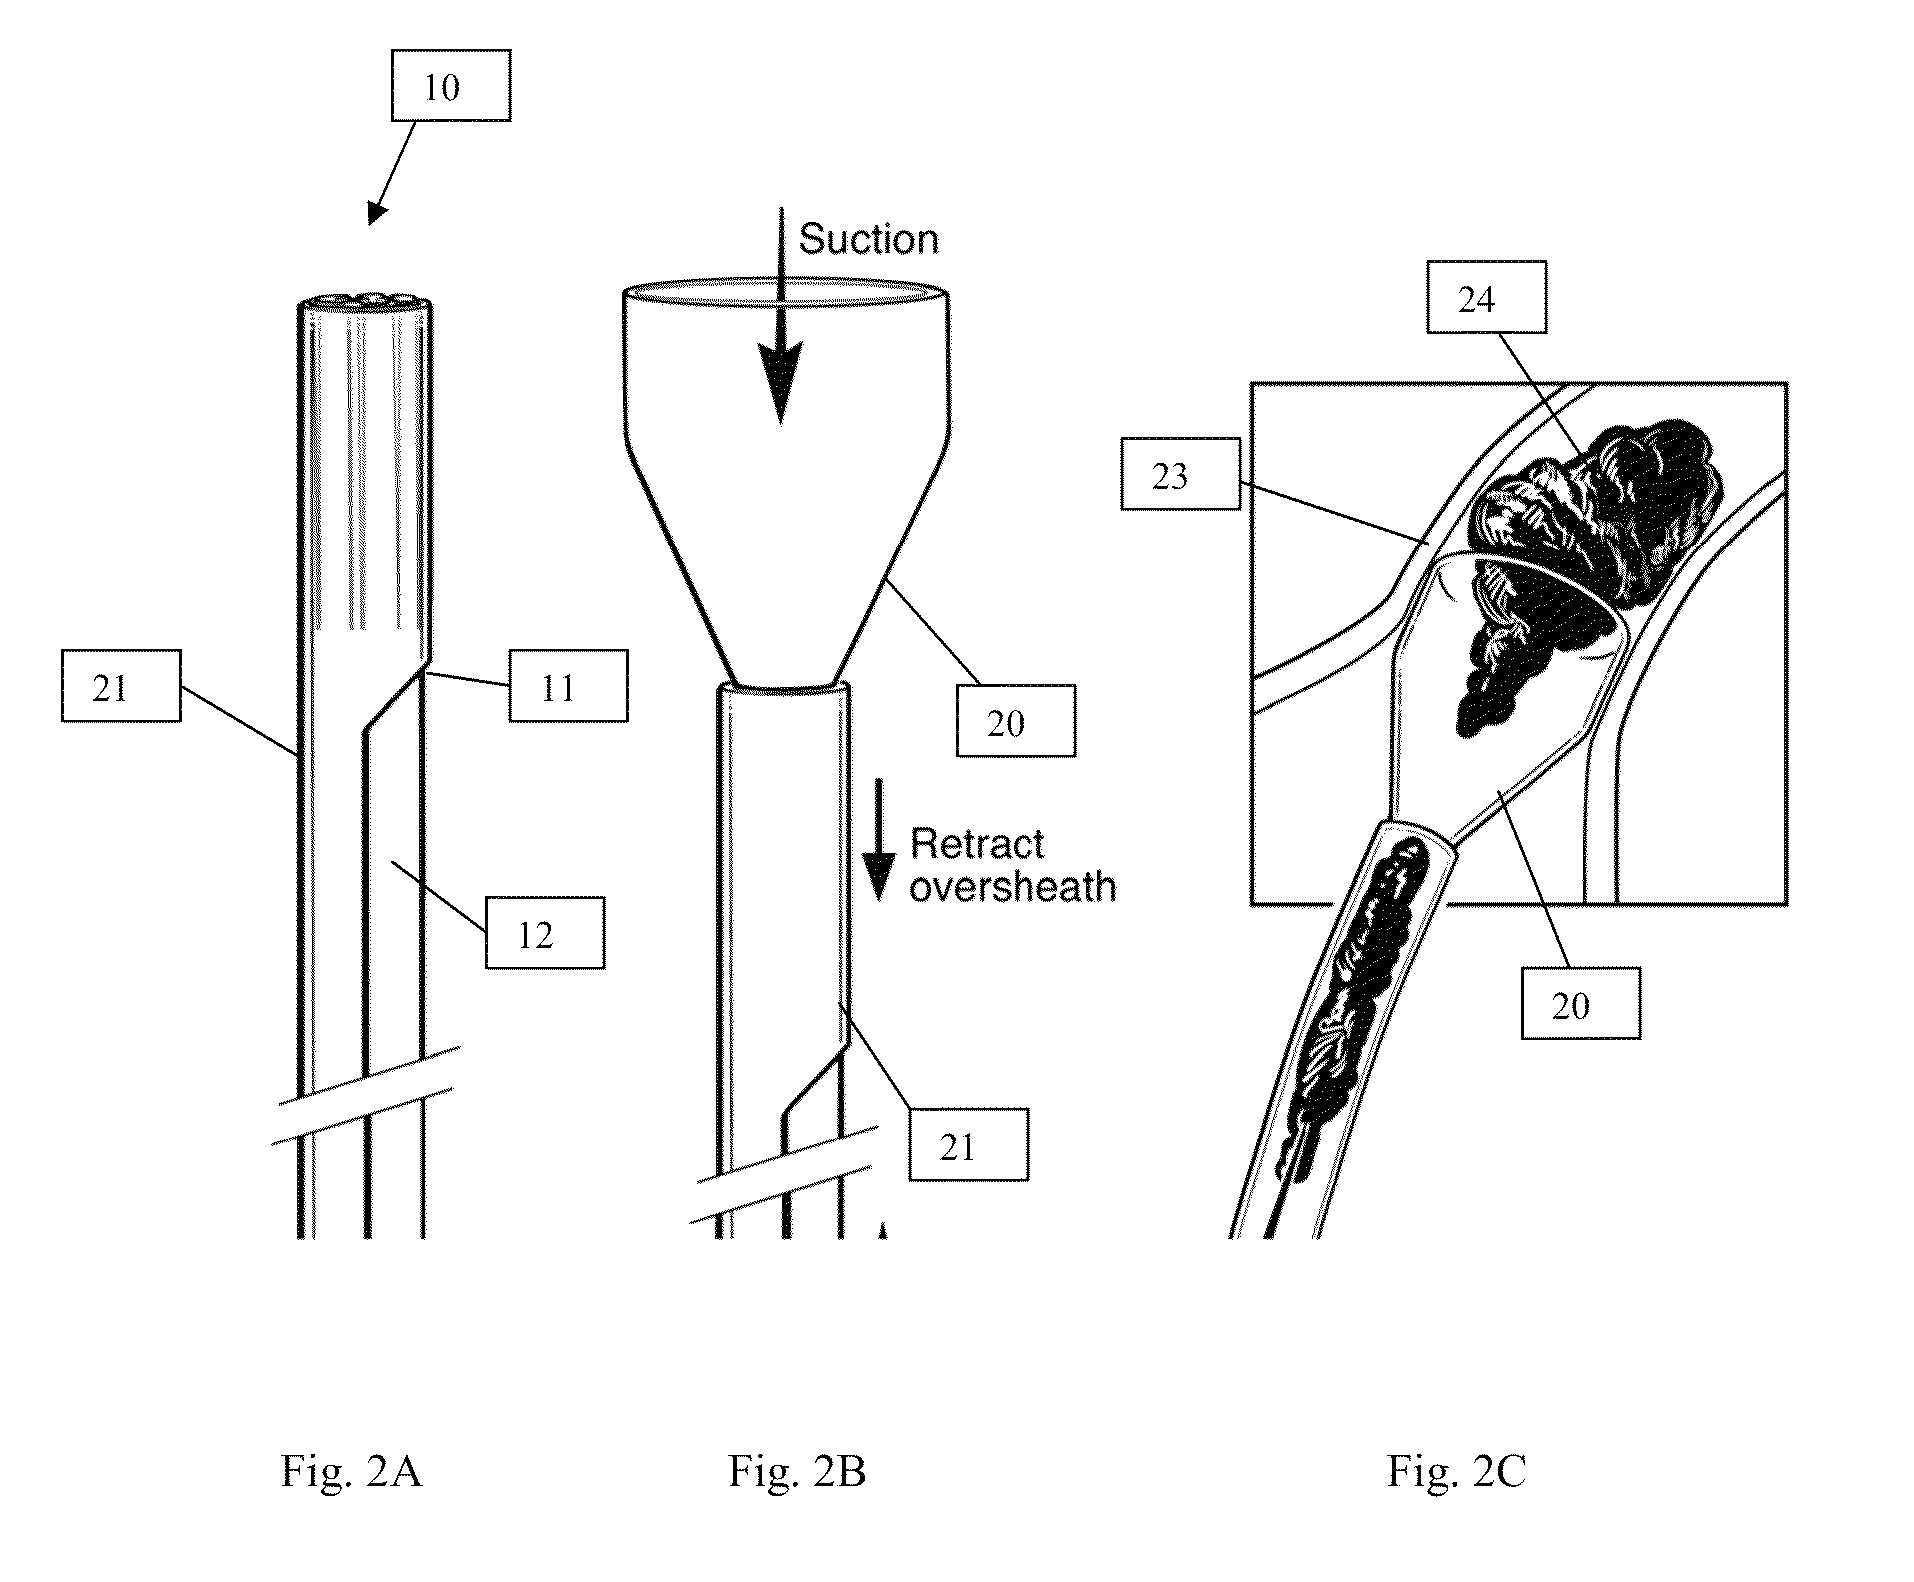 Systems and methods for removing undesirable material within a circulatory system during a surgical procedure